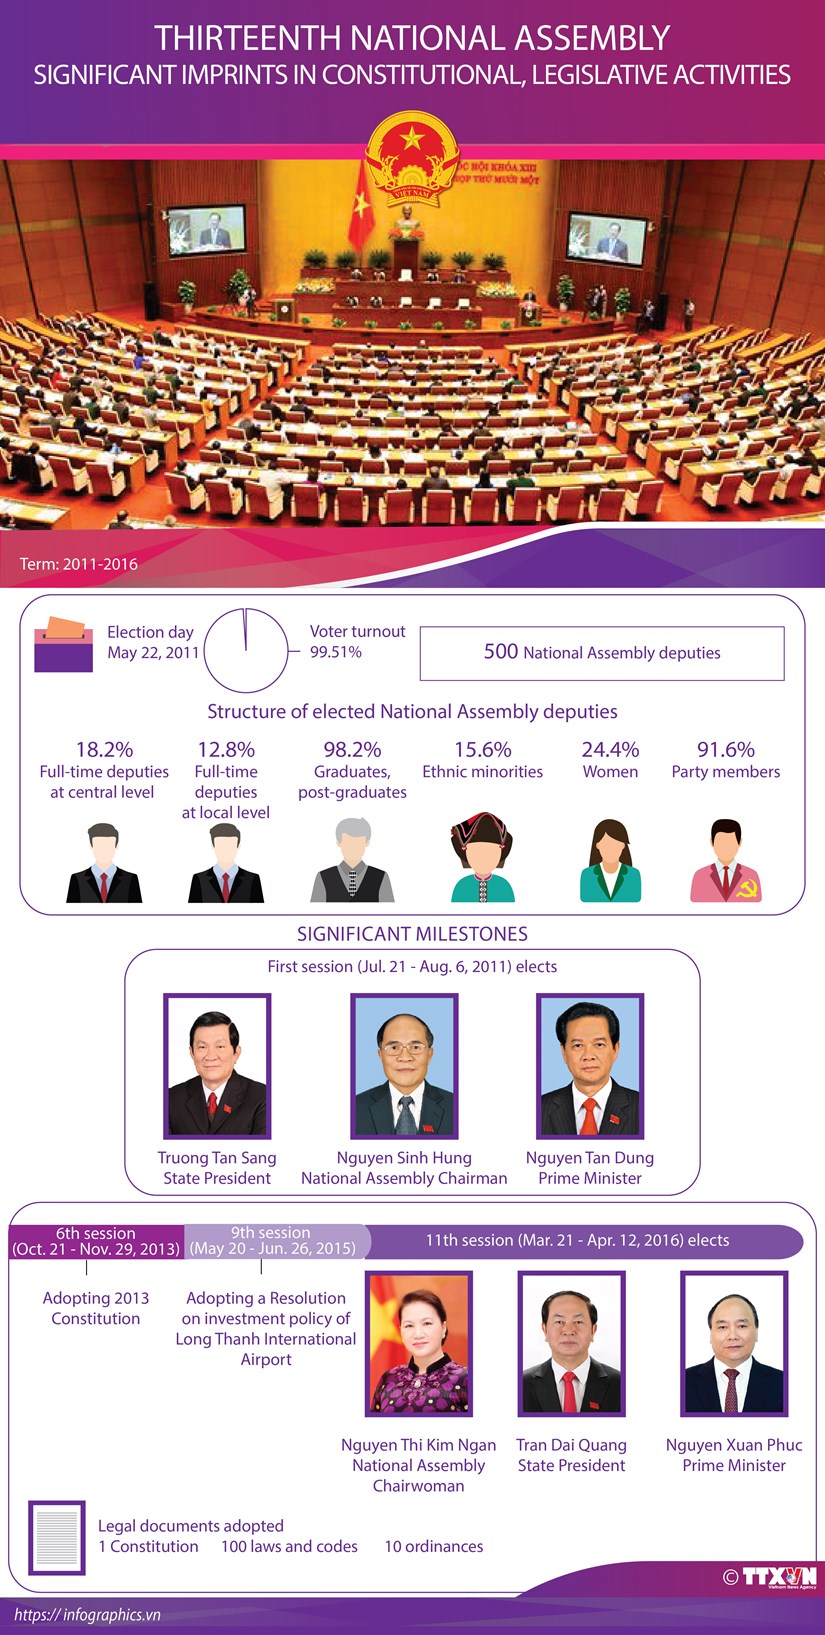 Thirteenth National Assembly: Significant imprints in consitutional, legislative activities hinh anh 1